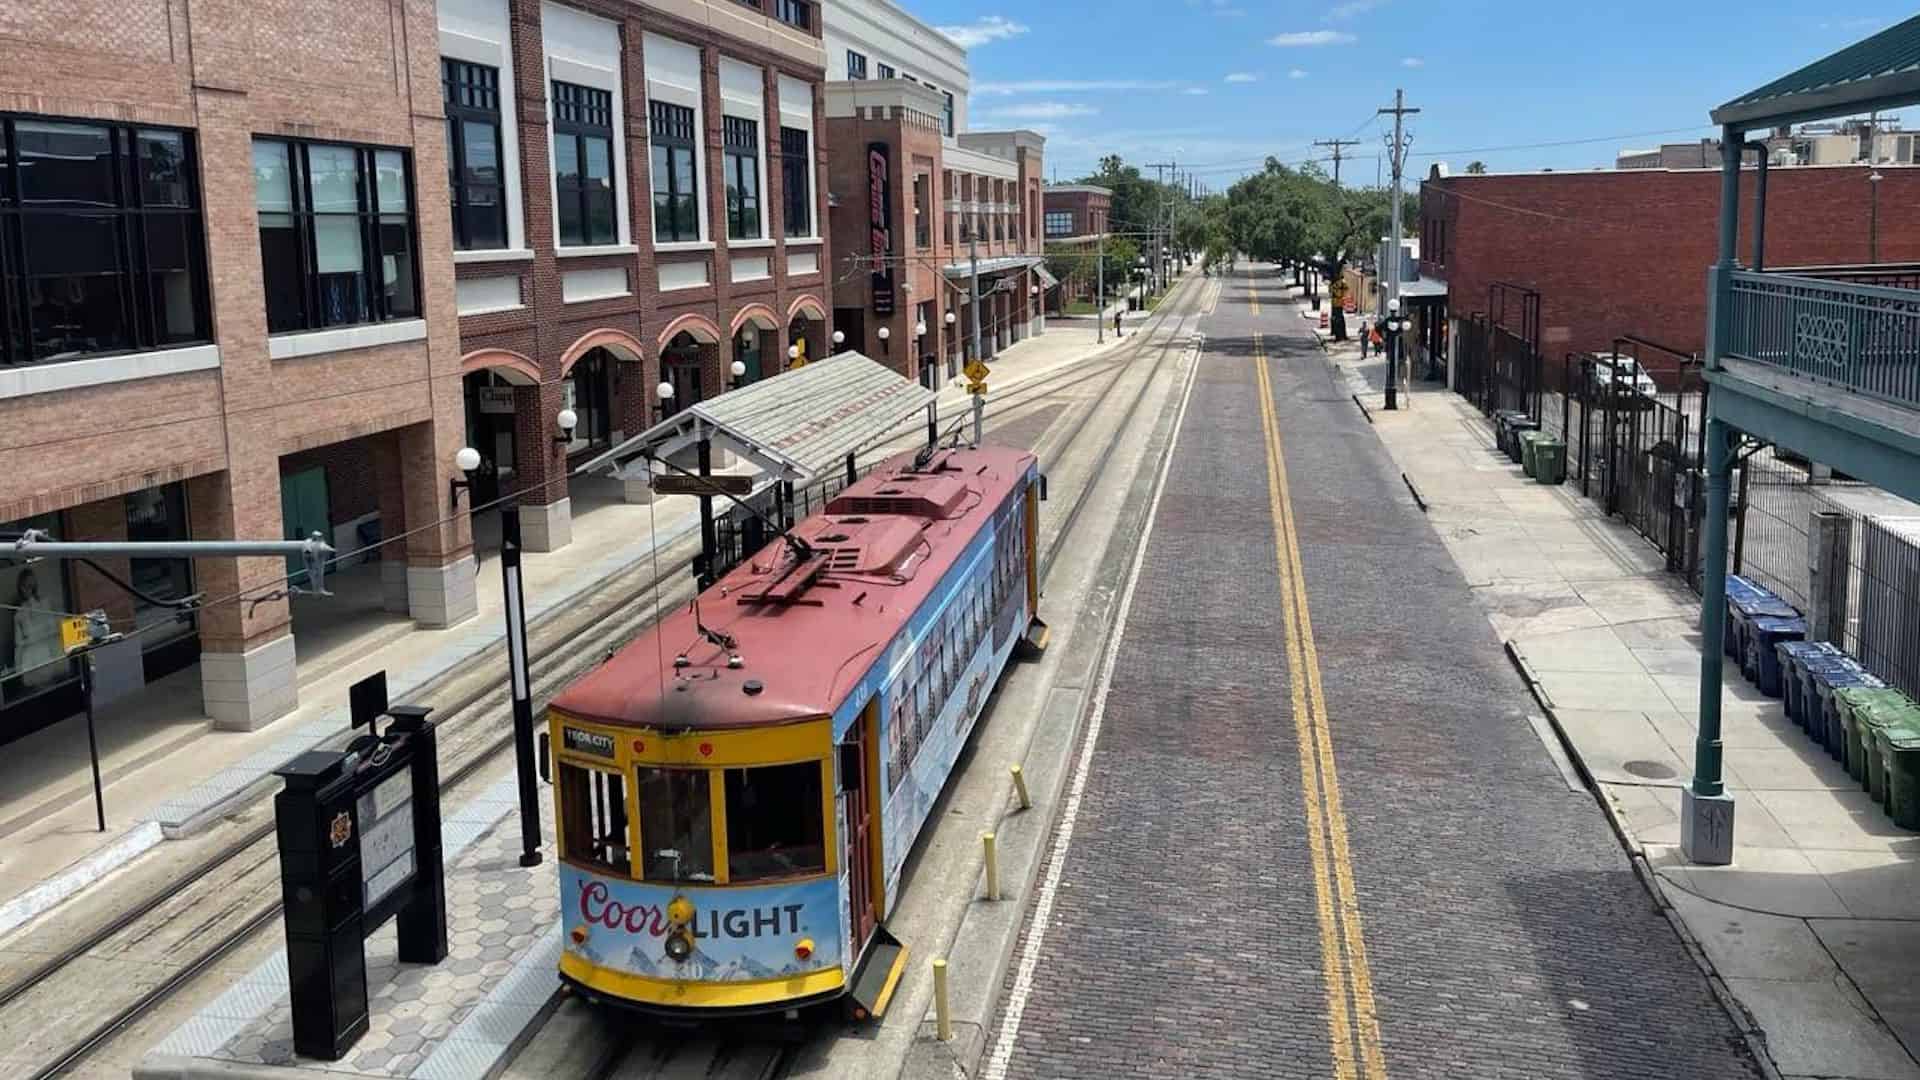 Ybor City trolley in the middle of a street